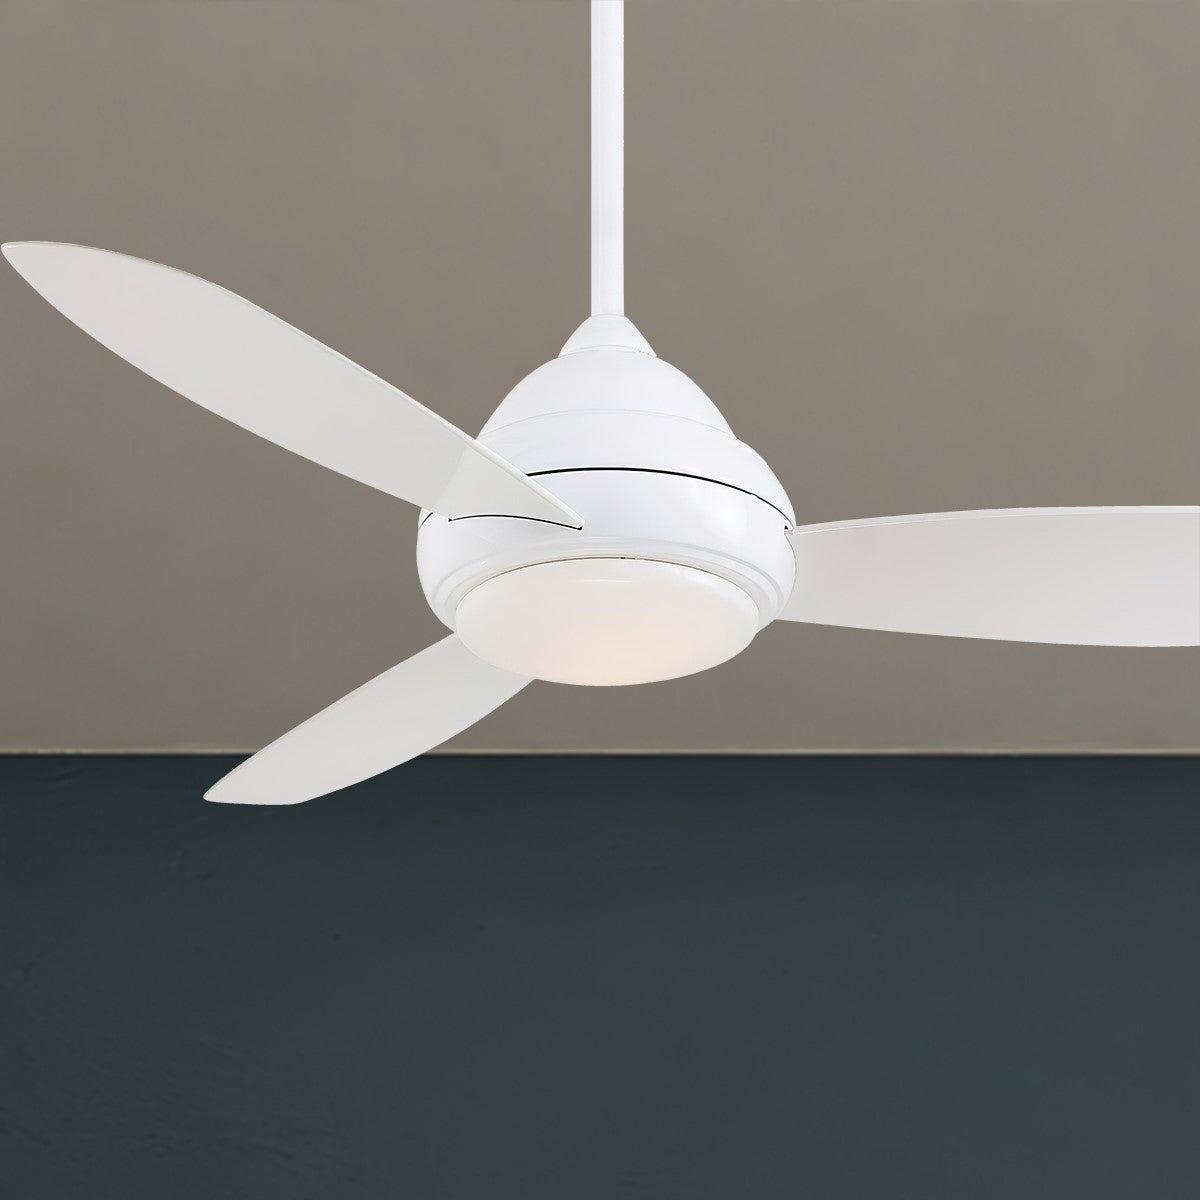 Minka Aire - Supra 52 Inch Ceiling Fan With Light And Remote